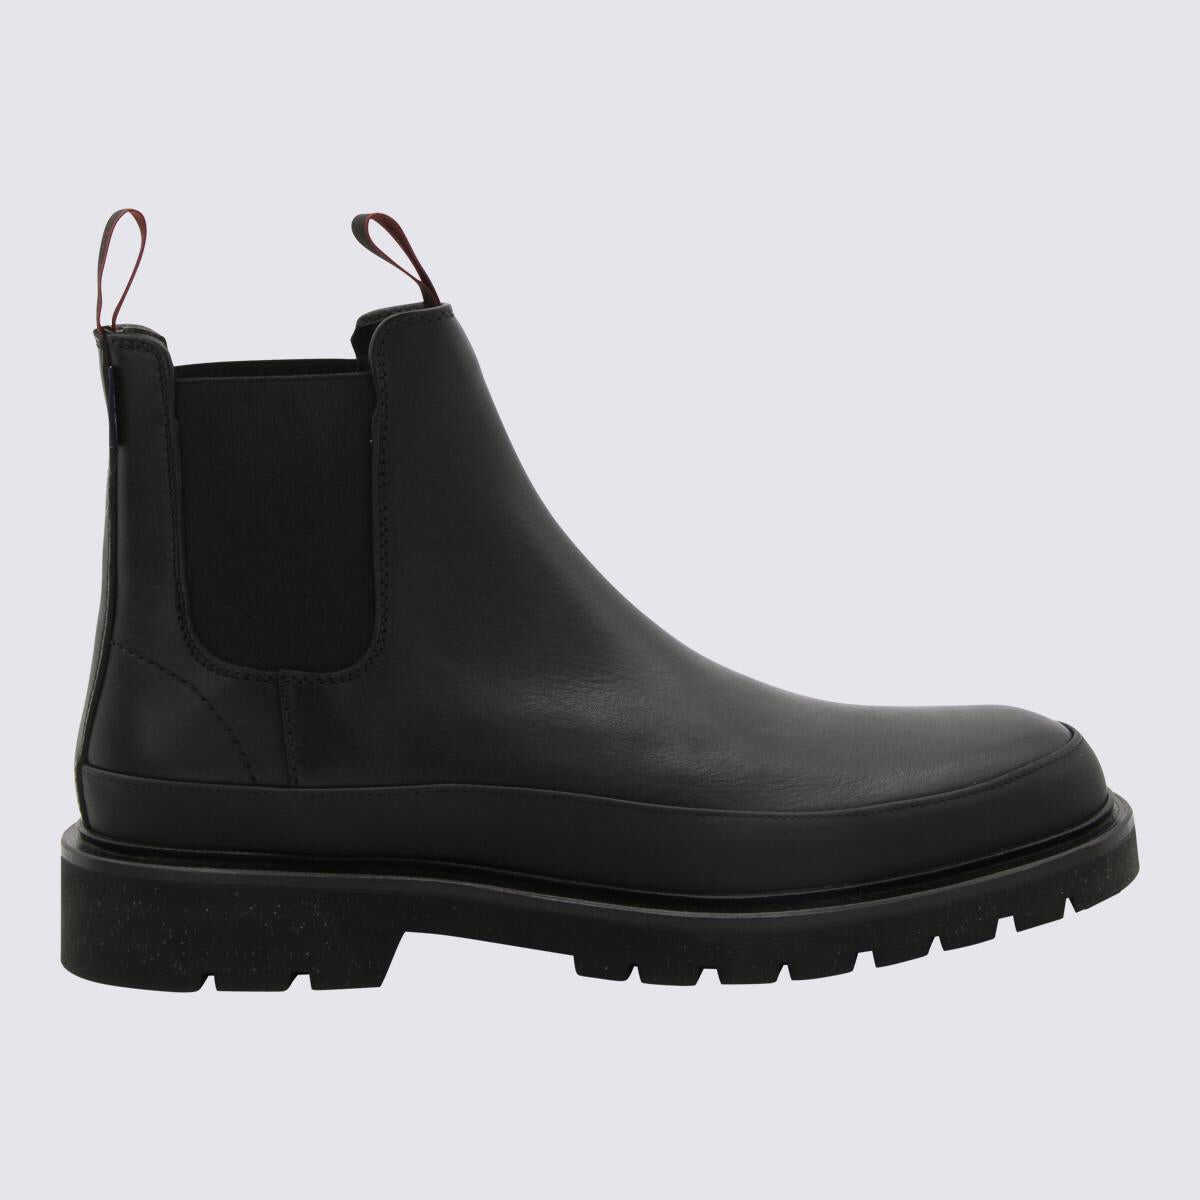 Paul Smith PAUL SMITH BLACK LEATHER ANKLE BOOTS BLACK